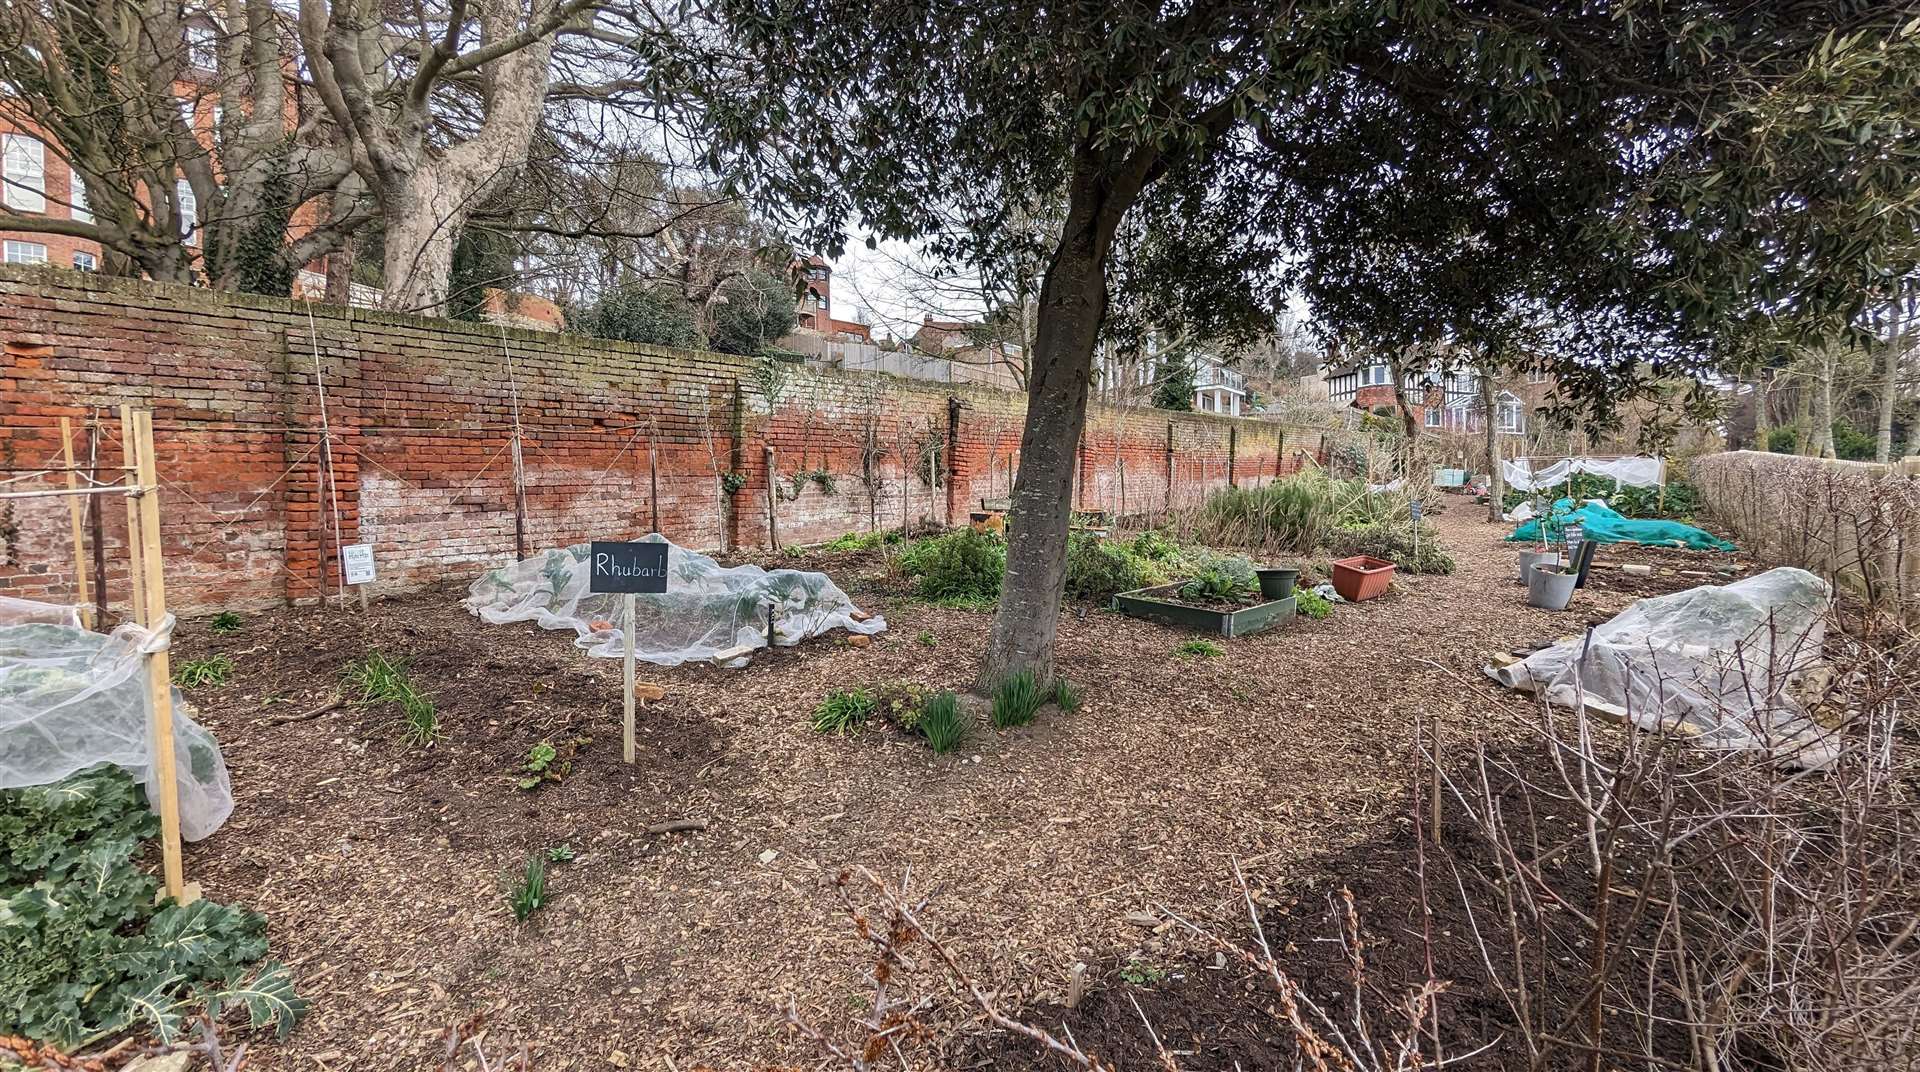 The Sandgate Society hopes the community garden will be maintained once Saga leaves